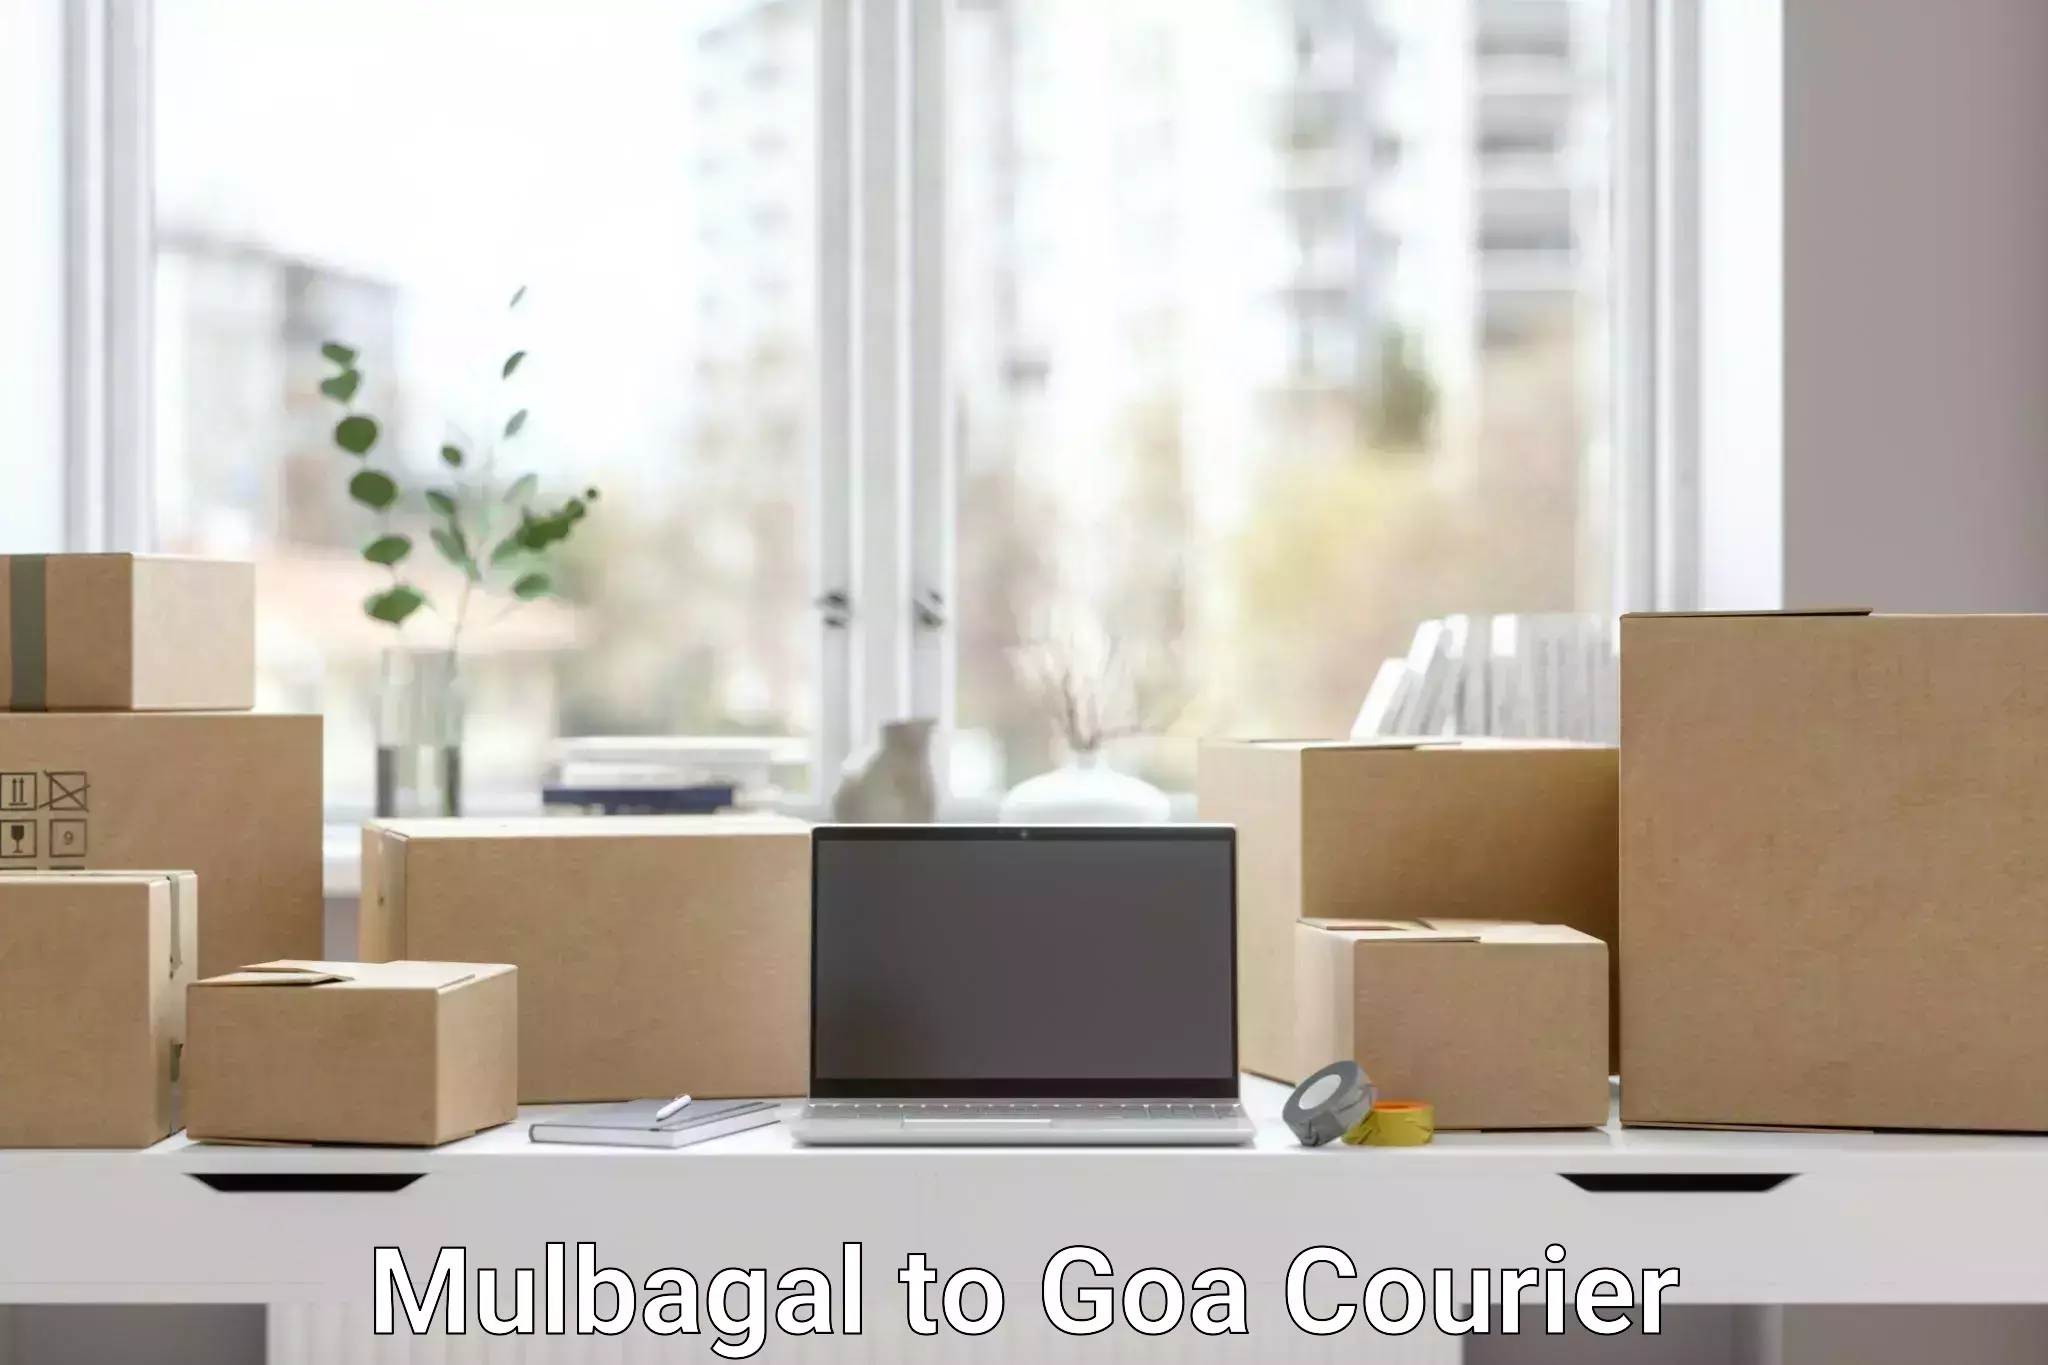 Courier service comparison Mulbagal to Margao